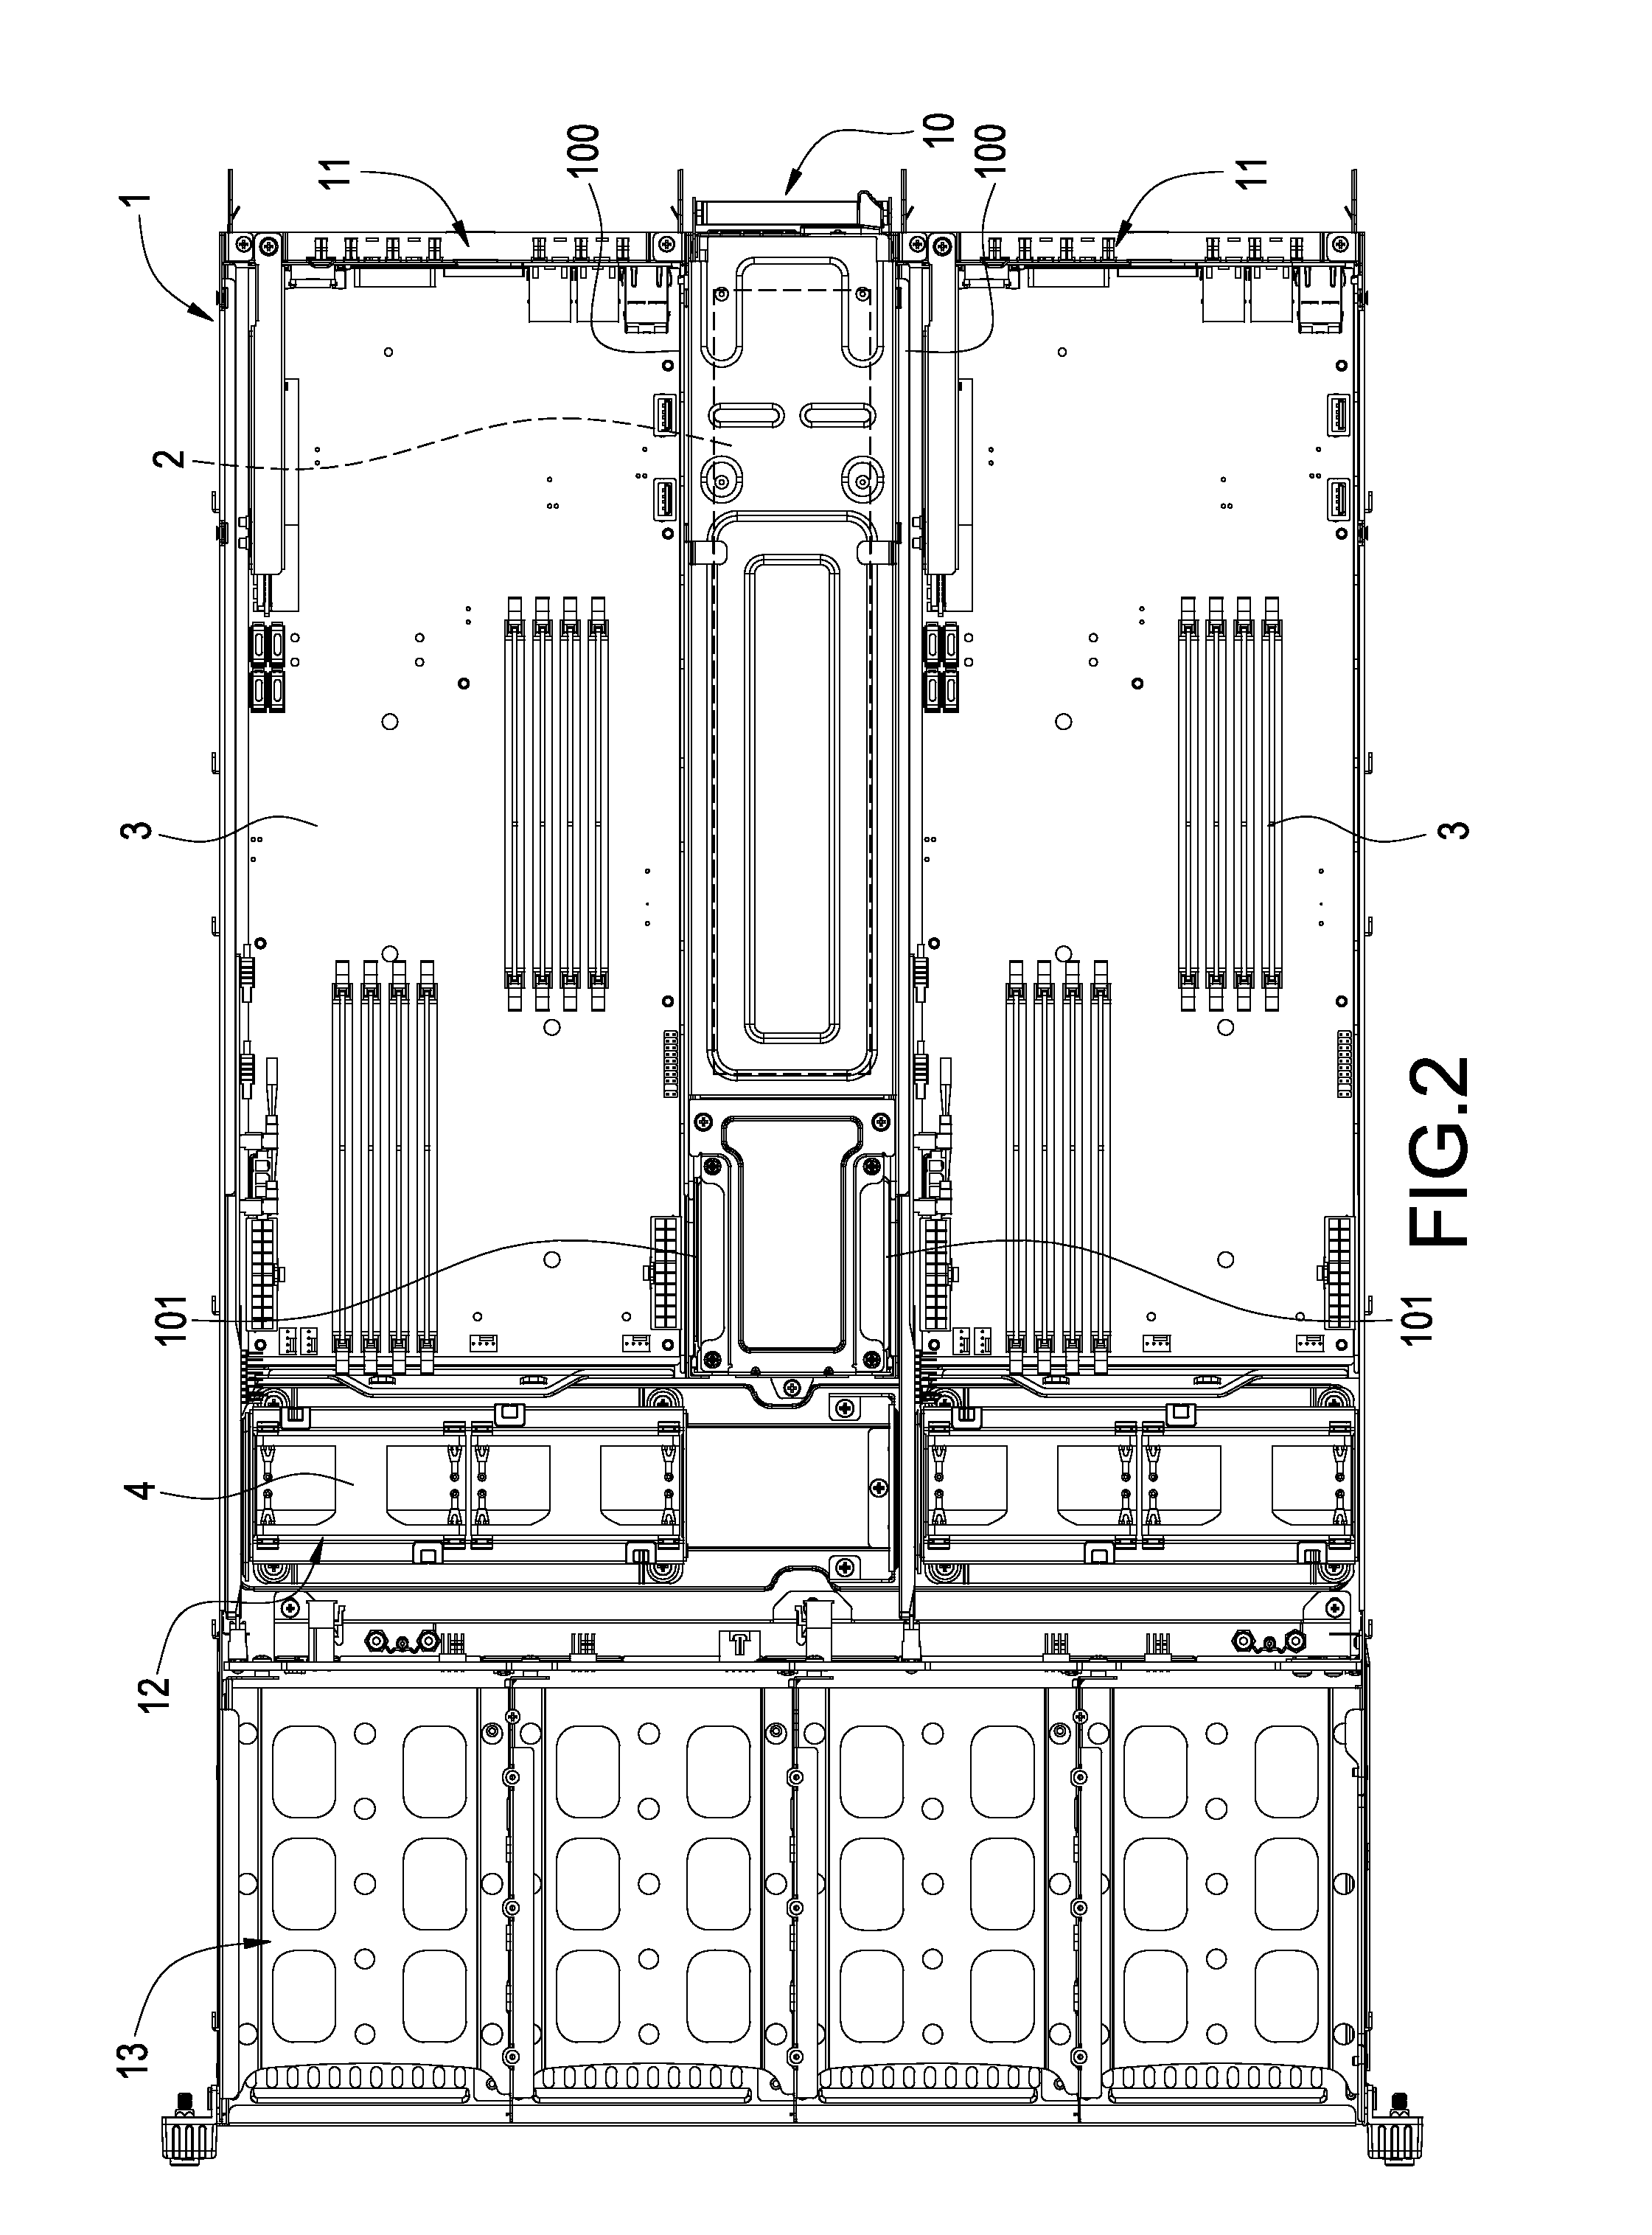 Industrial computer chassis structure with power source disposed centrally